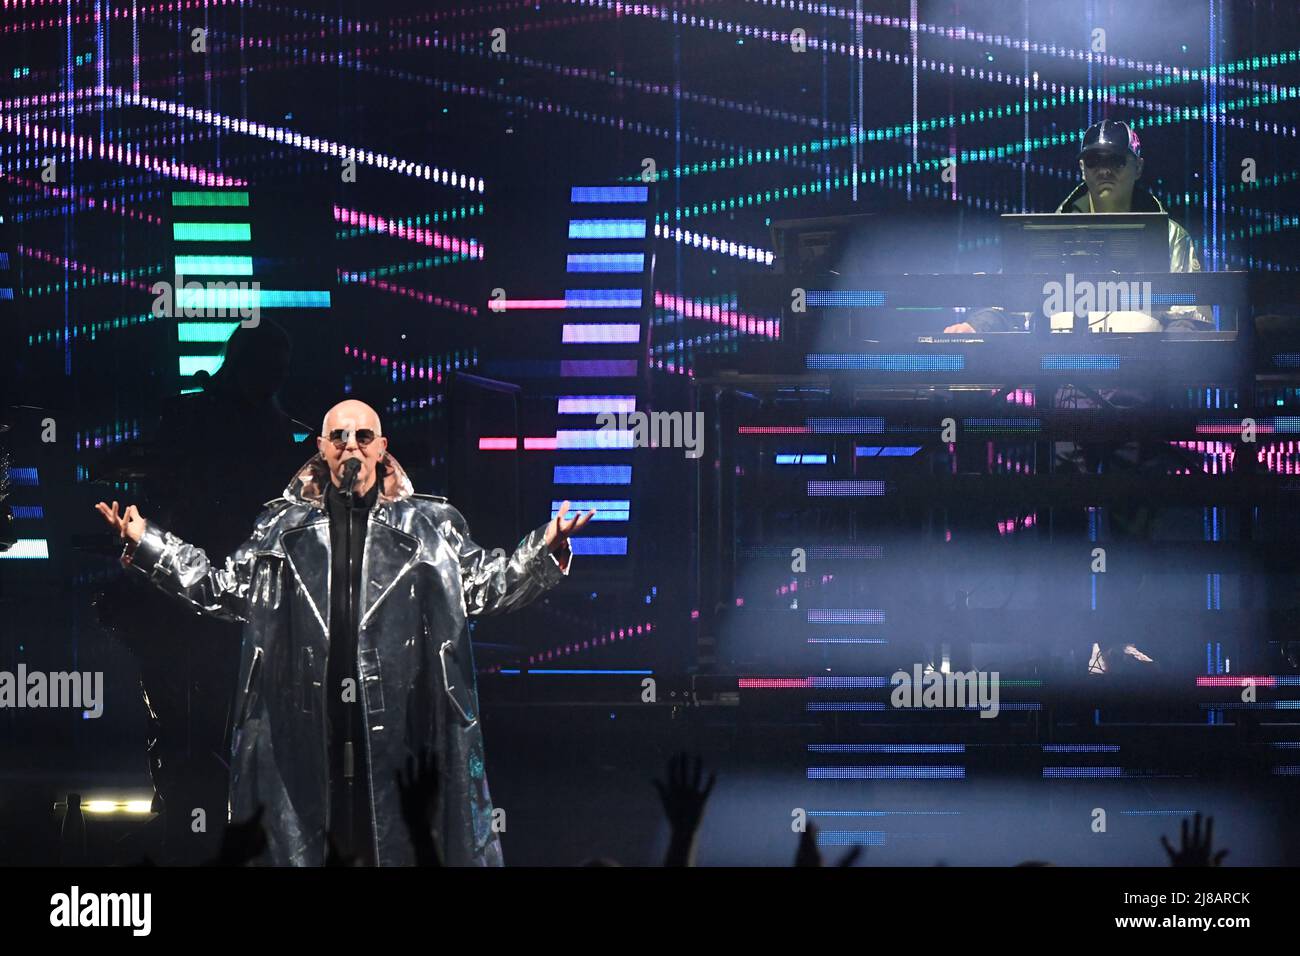 Munich, Germany. 14th May, 2022. The Pet Shop Boys are on stage at